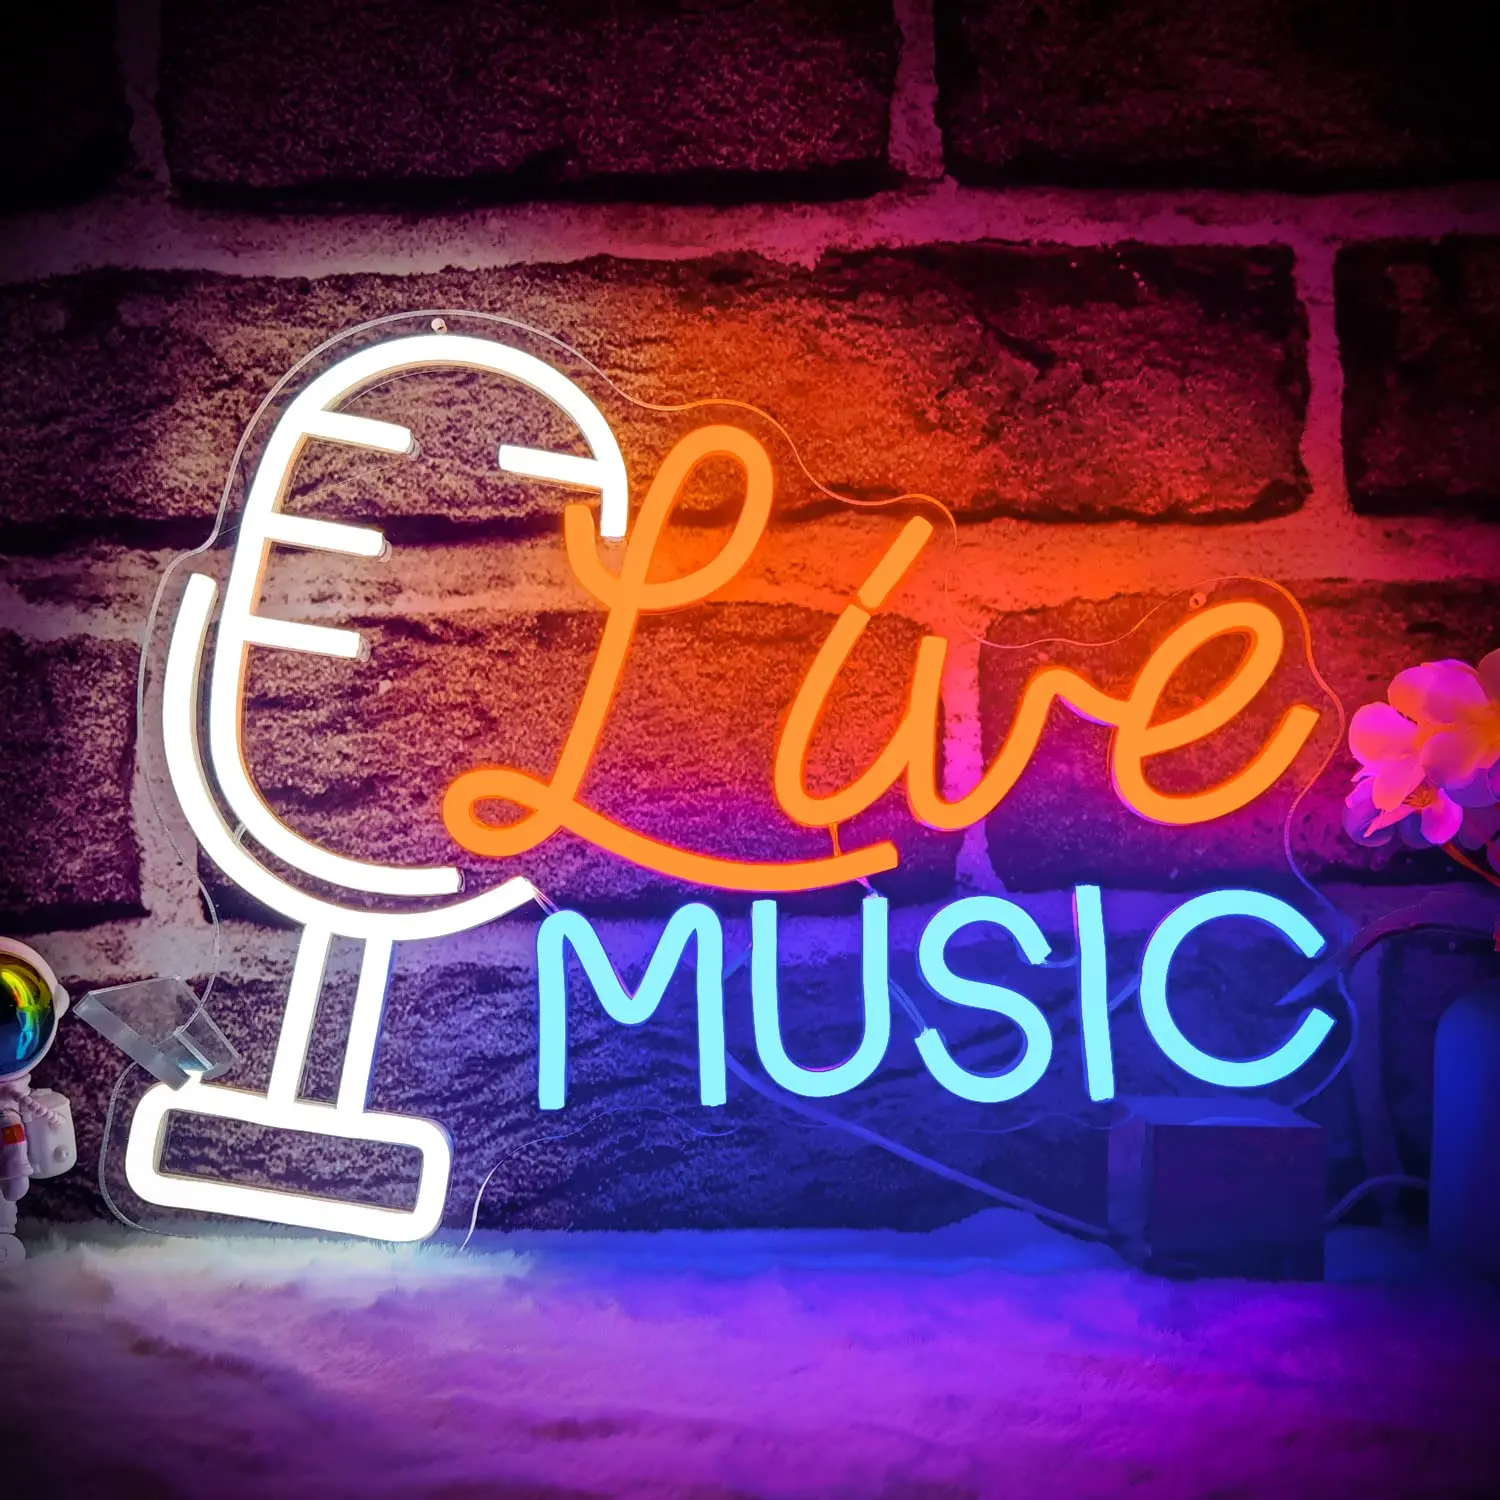 

Live Music Neon Light Microphone Led Sign Party Pub Dining Melody Studio Room Bedroom Home Bar Restaurant Shop Wall Decoration